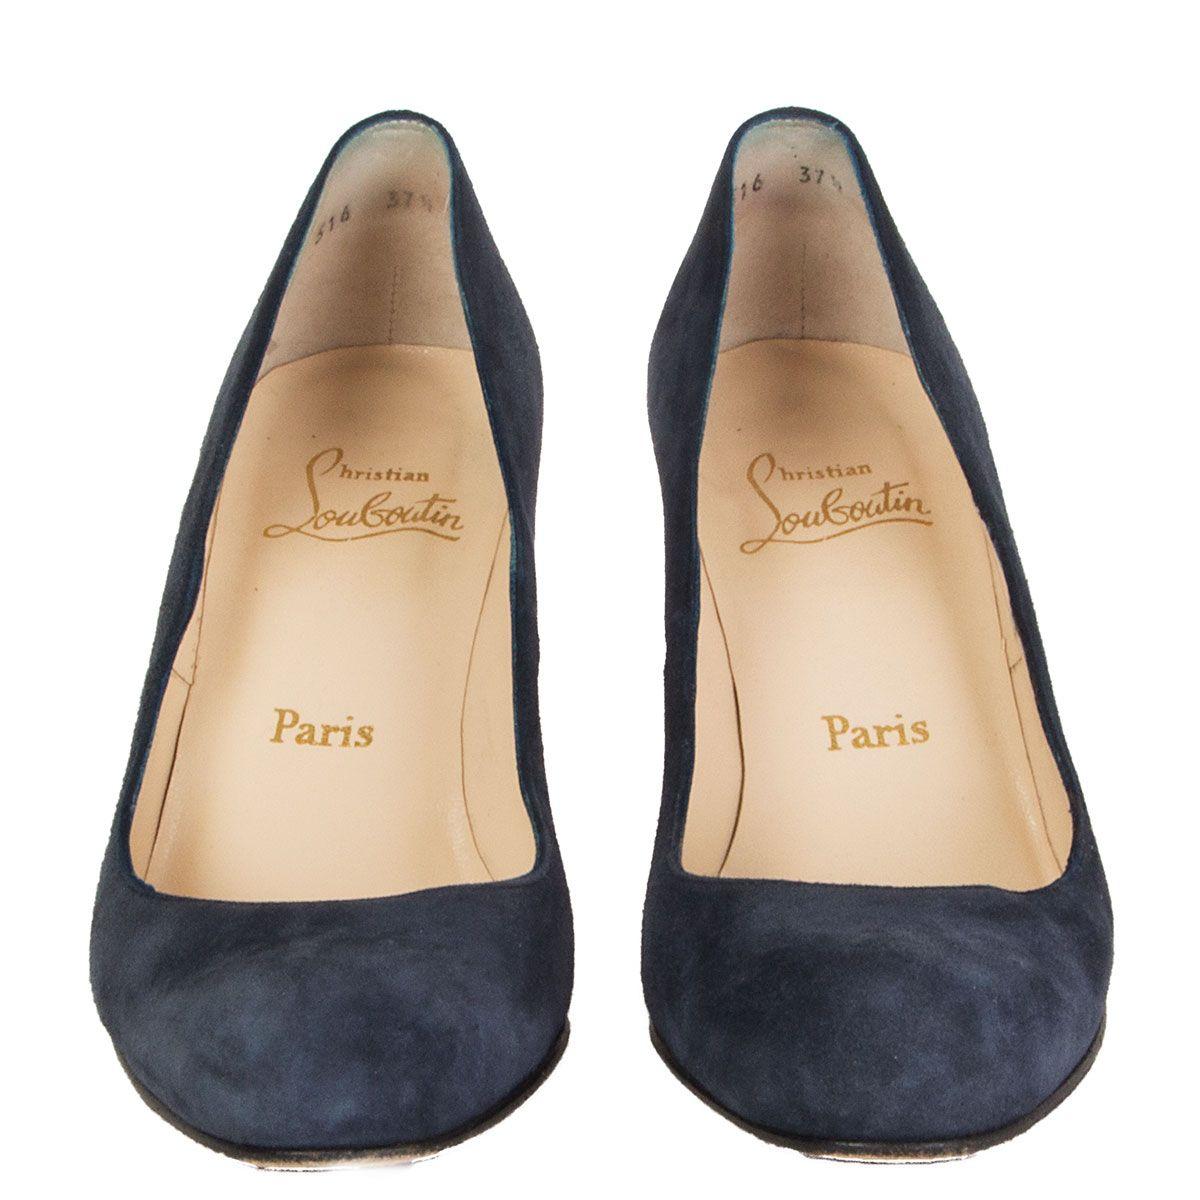 100% authentic Christian Louboutin 'Simple Pump' round-toe Classic Pumps in navy blue suede. Have been worn and are in excellent condition. 

Measurements
Imprinted Size	37.5
Shoe Size	37.5
Inside Sole	24.5cm (9.6in)
Width	7.5cm (2.9in)
Heel	8.5cm